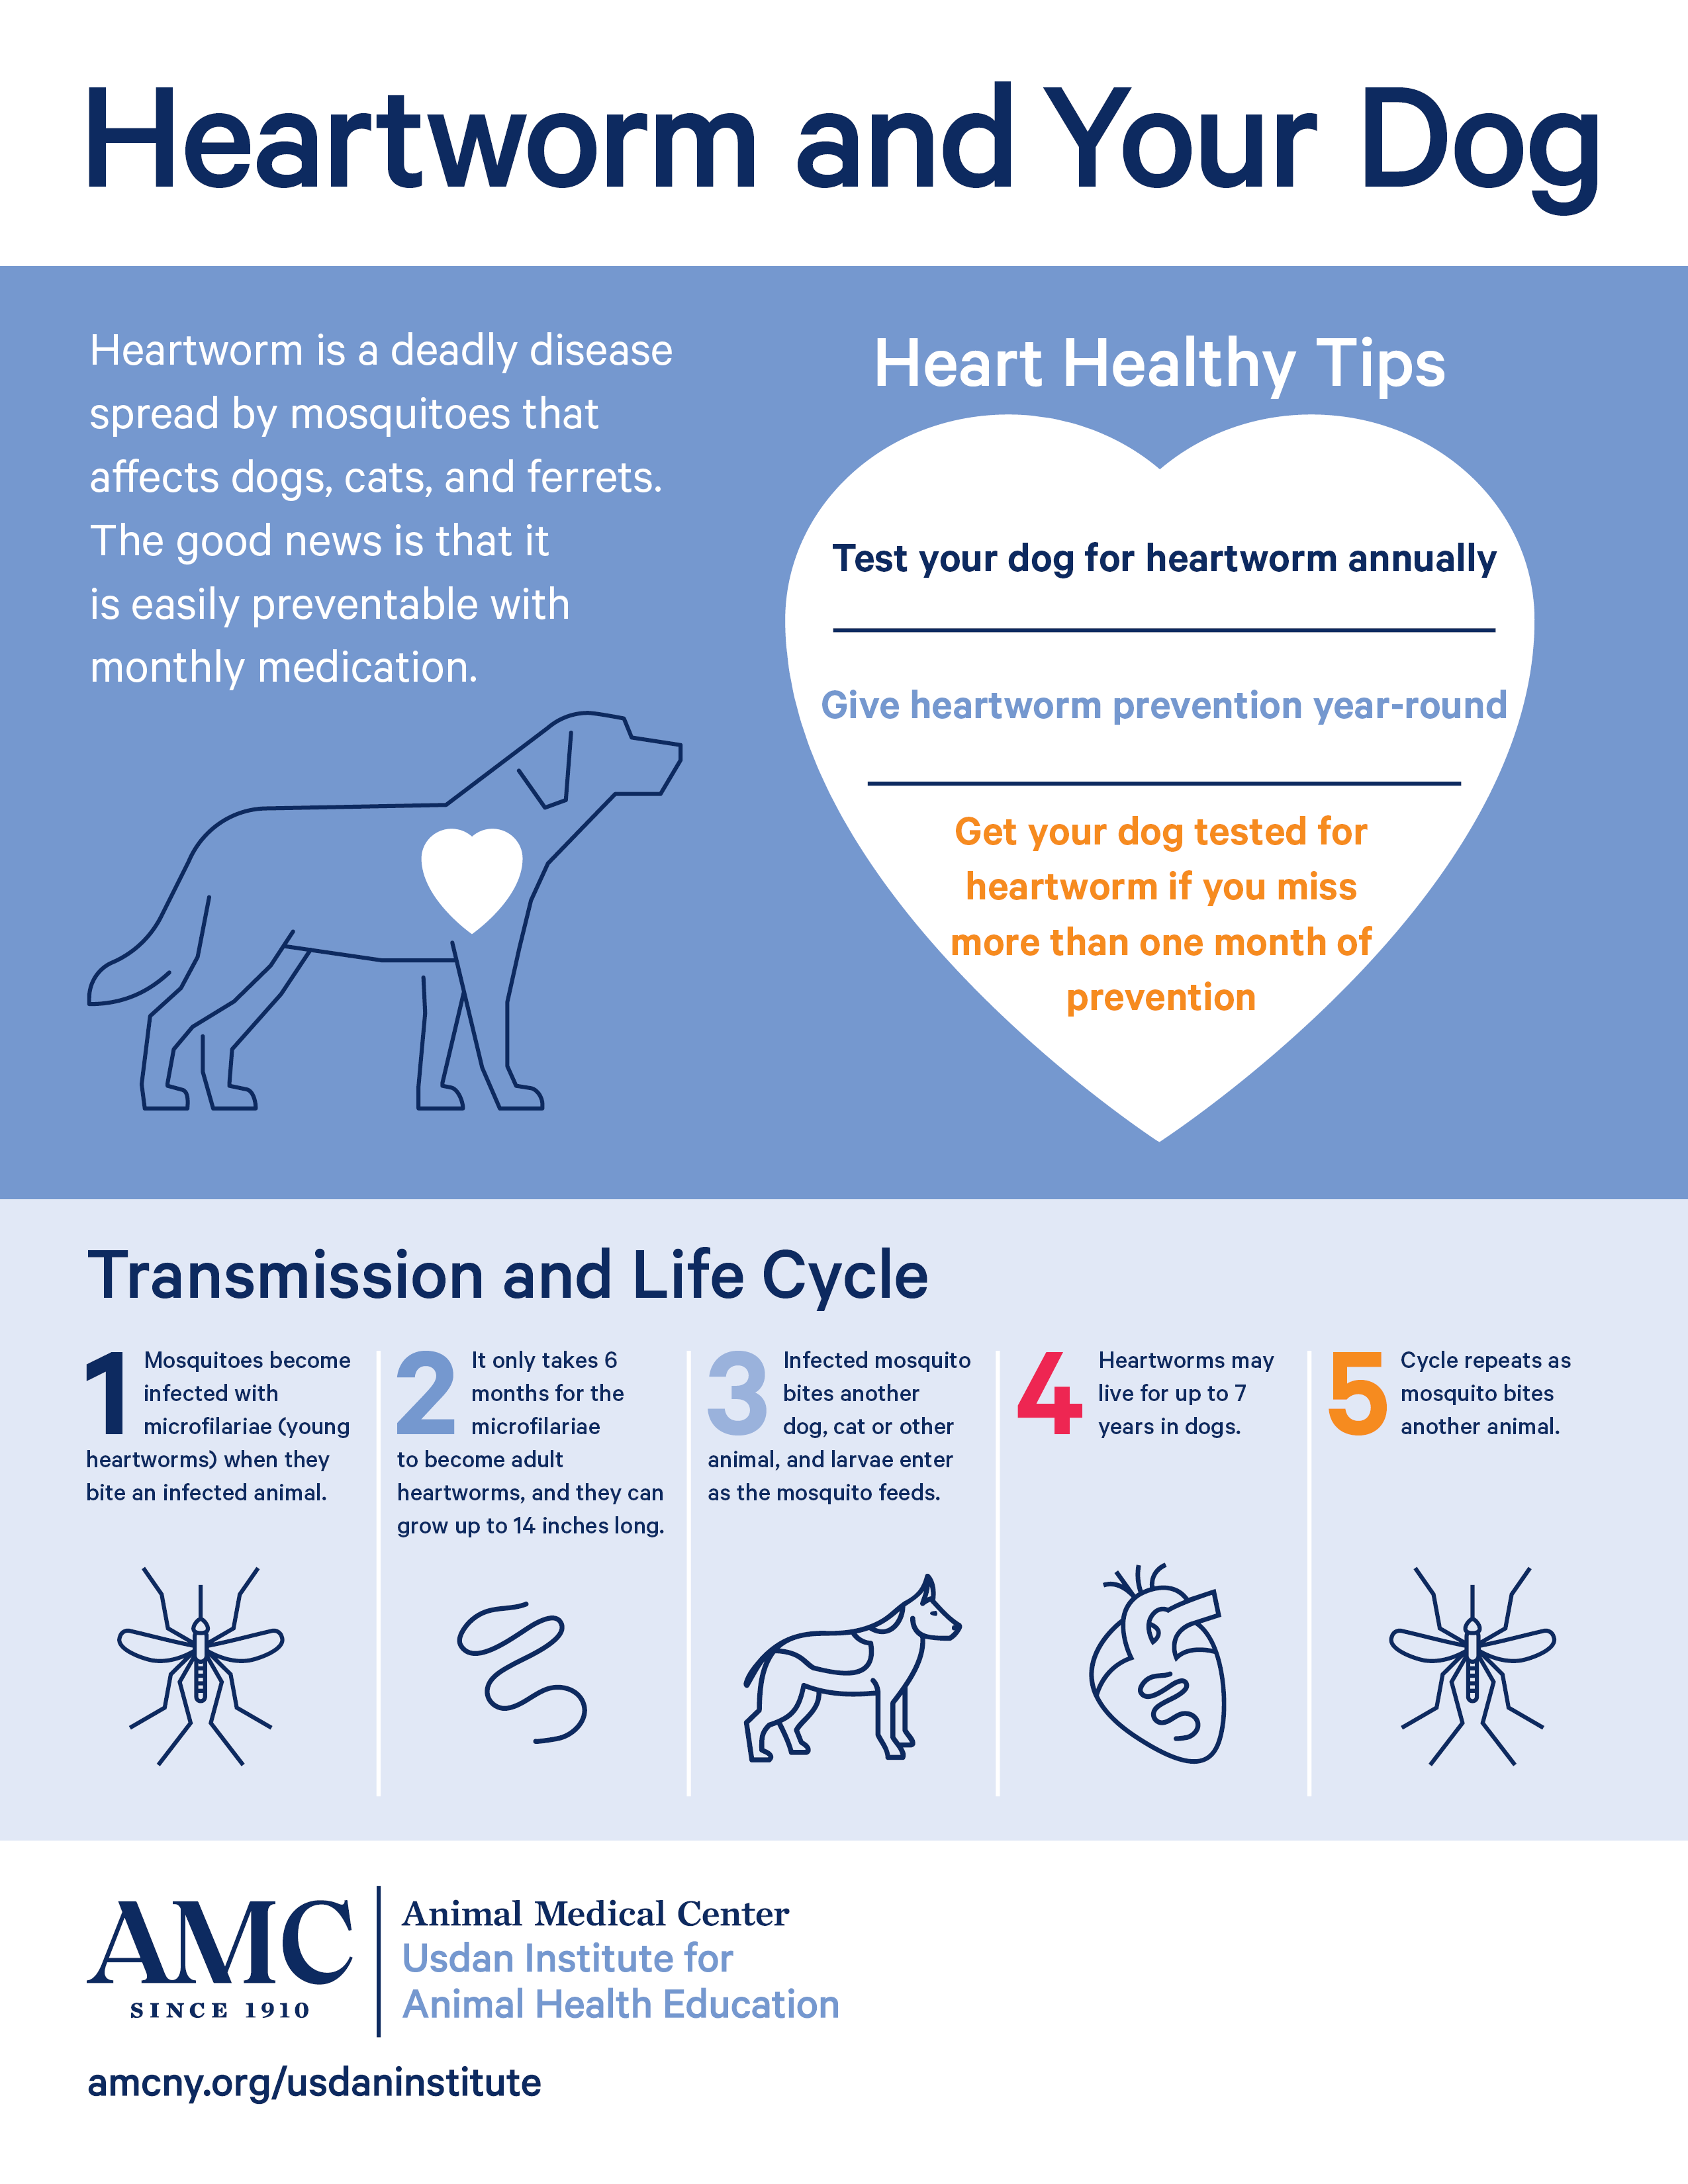 An infographic providing information about heartworm in dogs